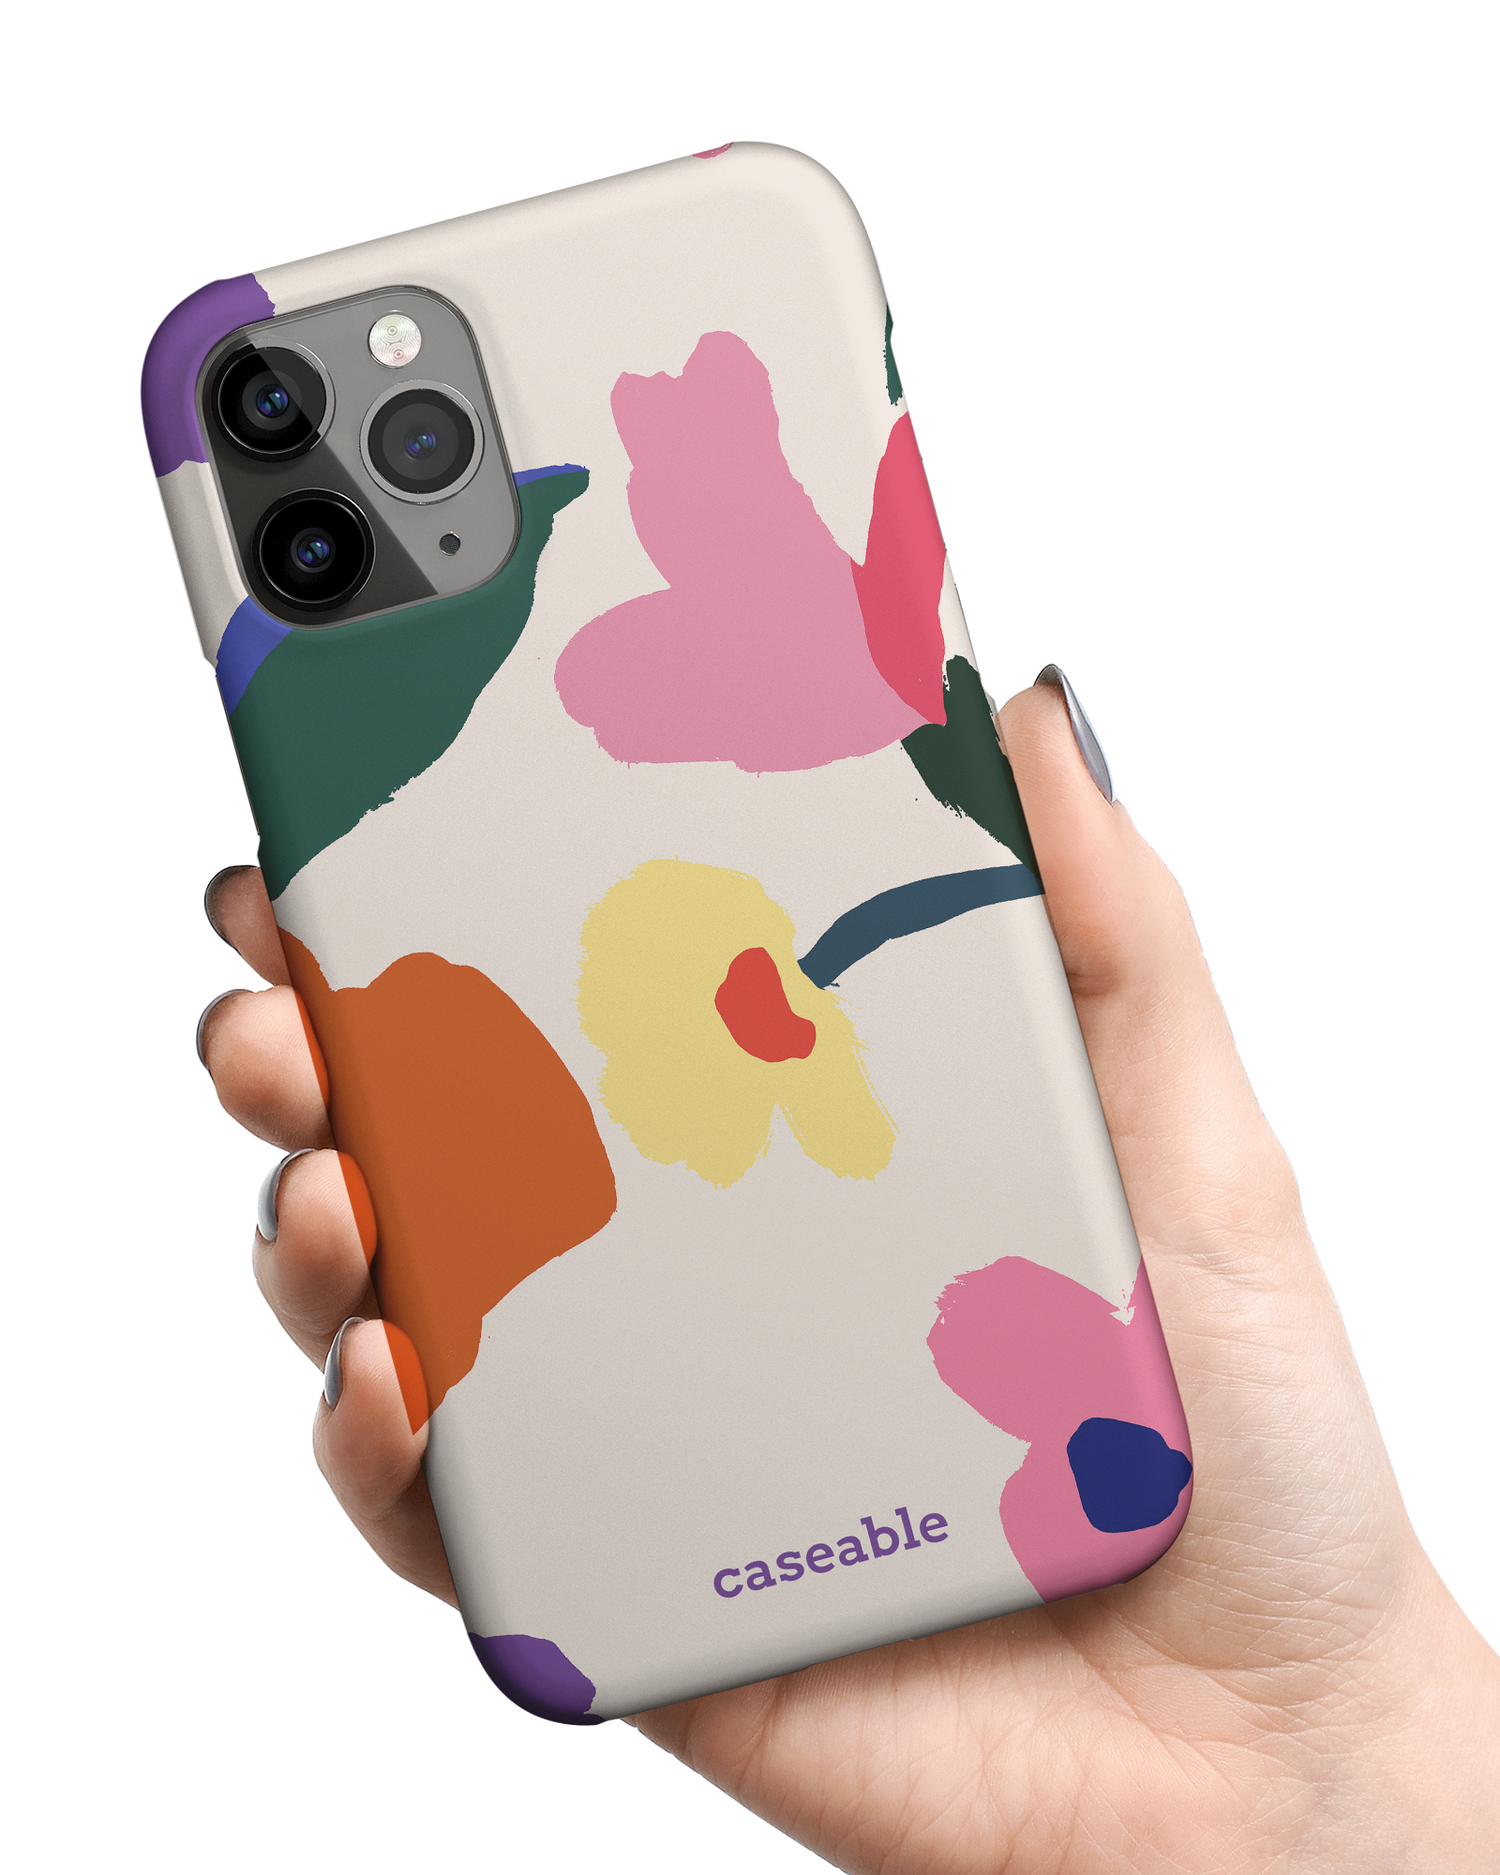 Handpainted Blooms Hard Shell Phone Case Apple iPhone 11 Pro Max held in hand